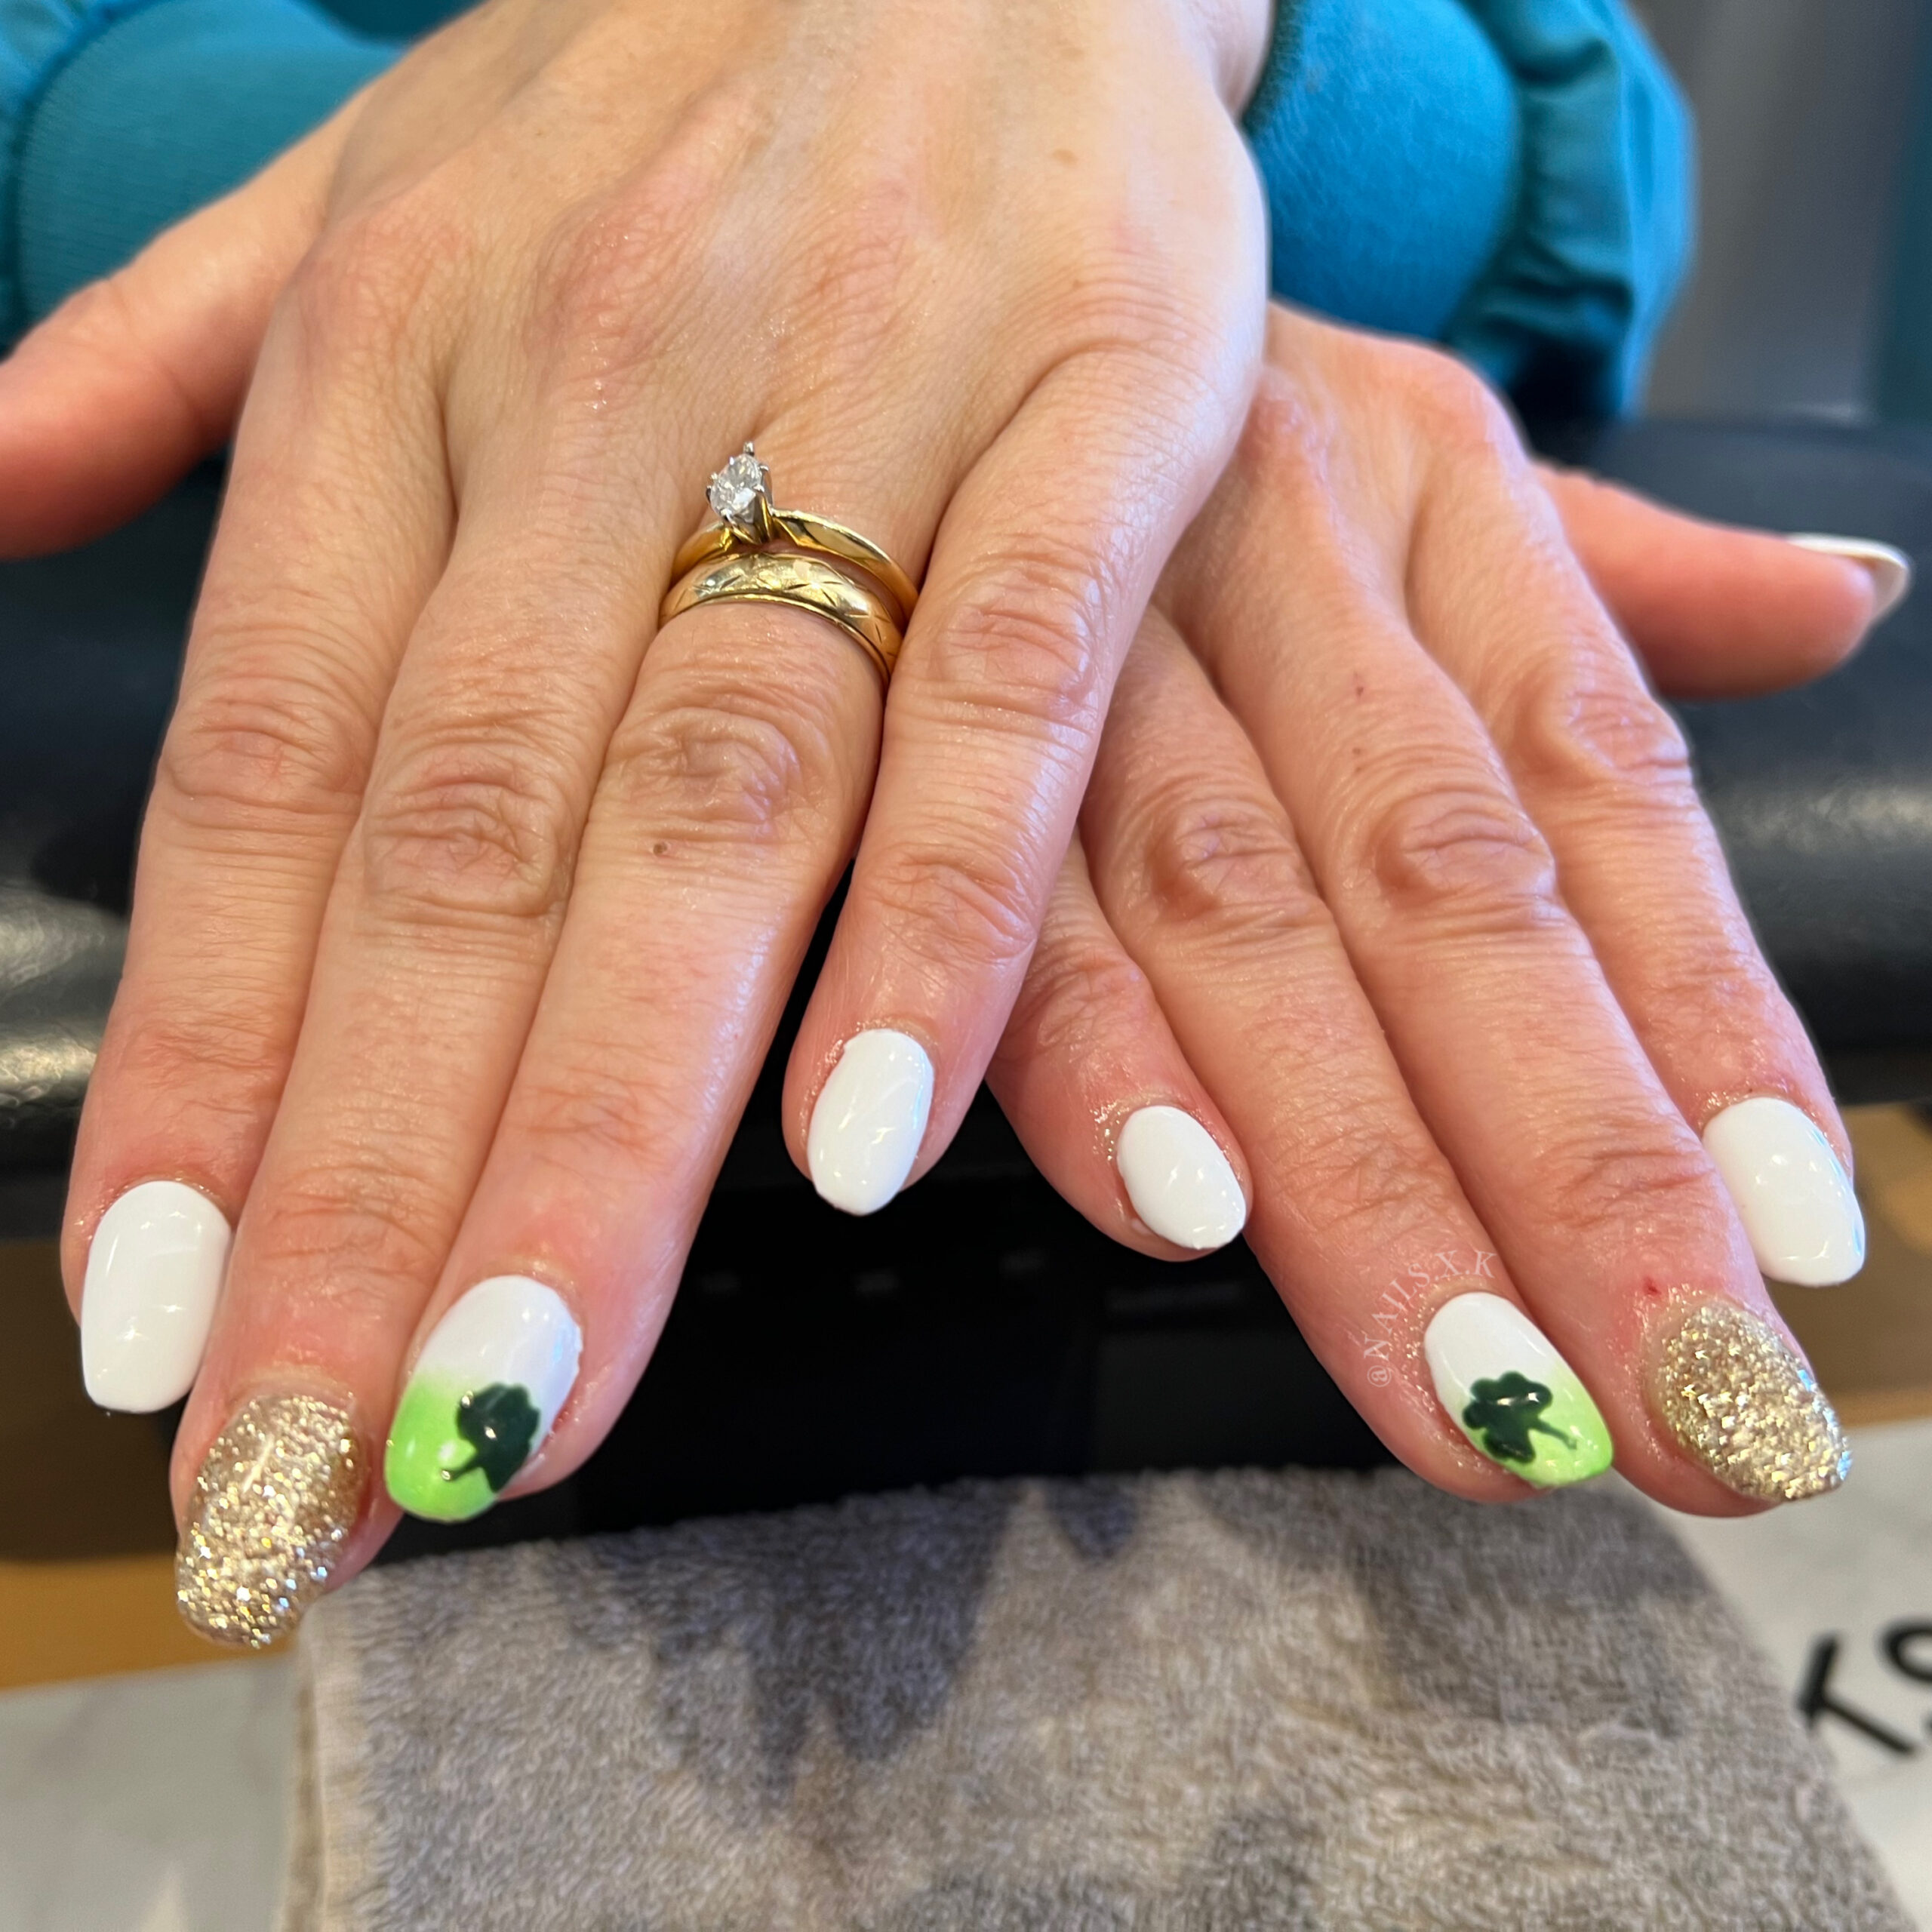 Acrylic Fill with St. Patrick's Day Design. Nails by K